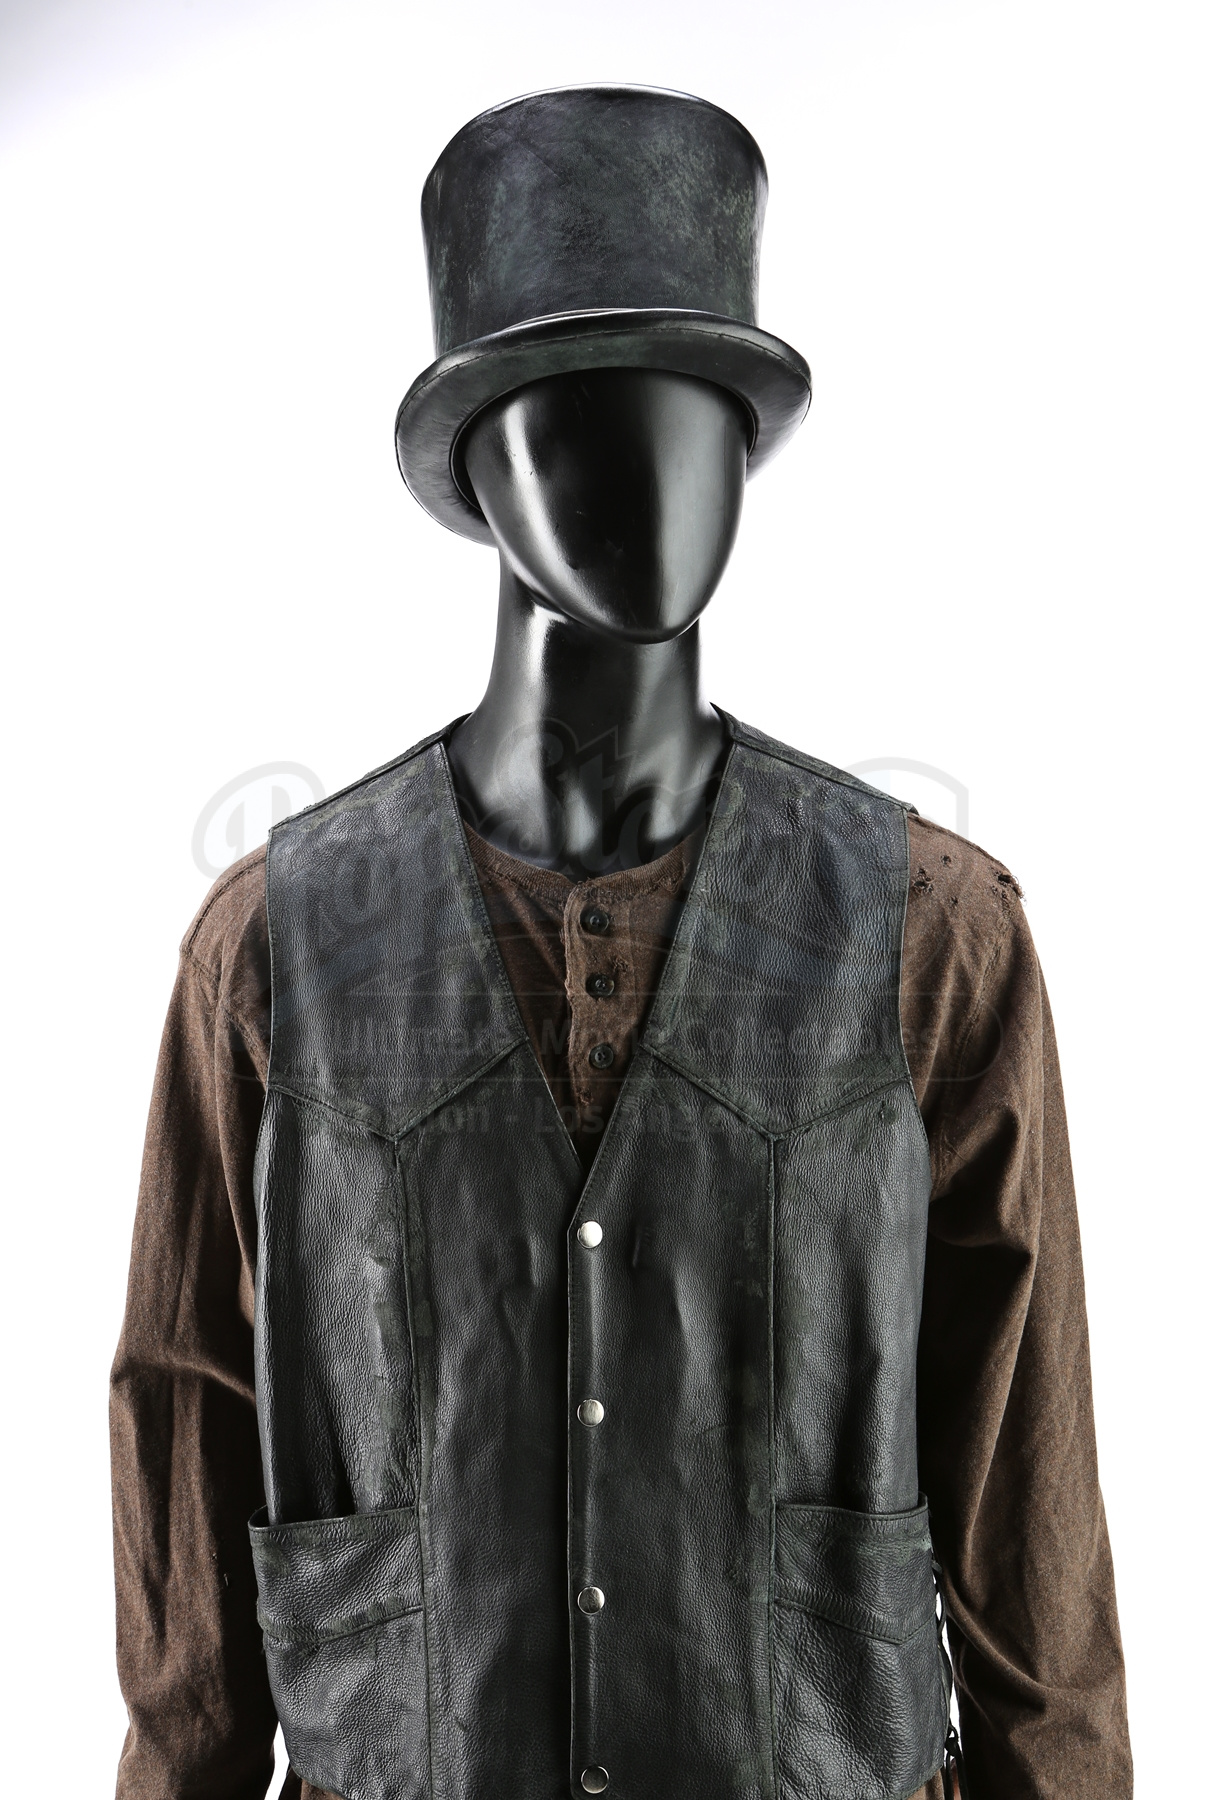 S6E11 - Modern Espionage: Alex Star-Burns Osbourne's (as portrayed by  Dino Stamatopoulos) Paintball Costume - Current price: $600